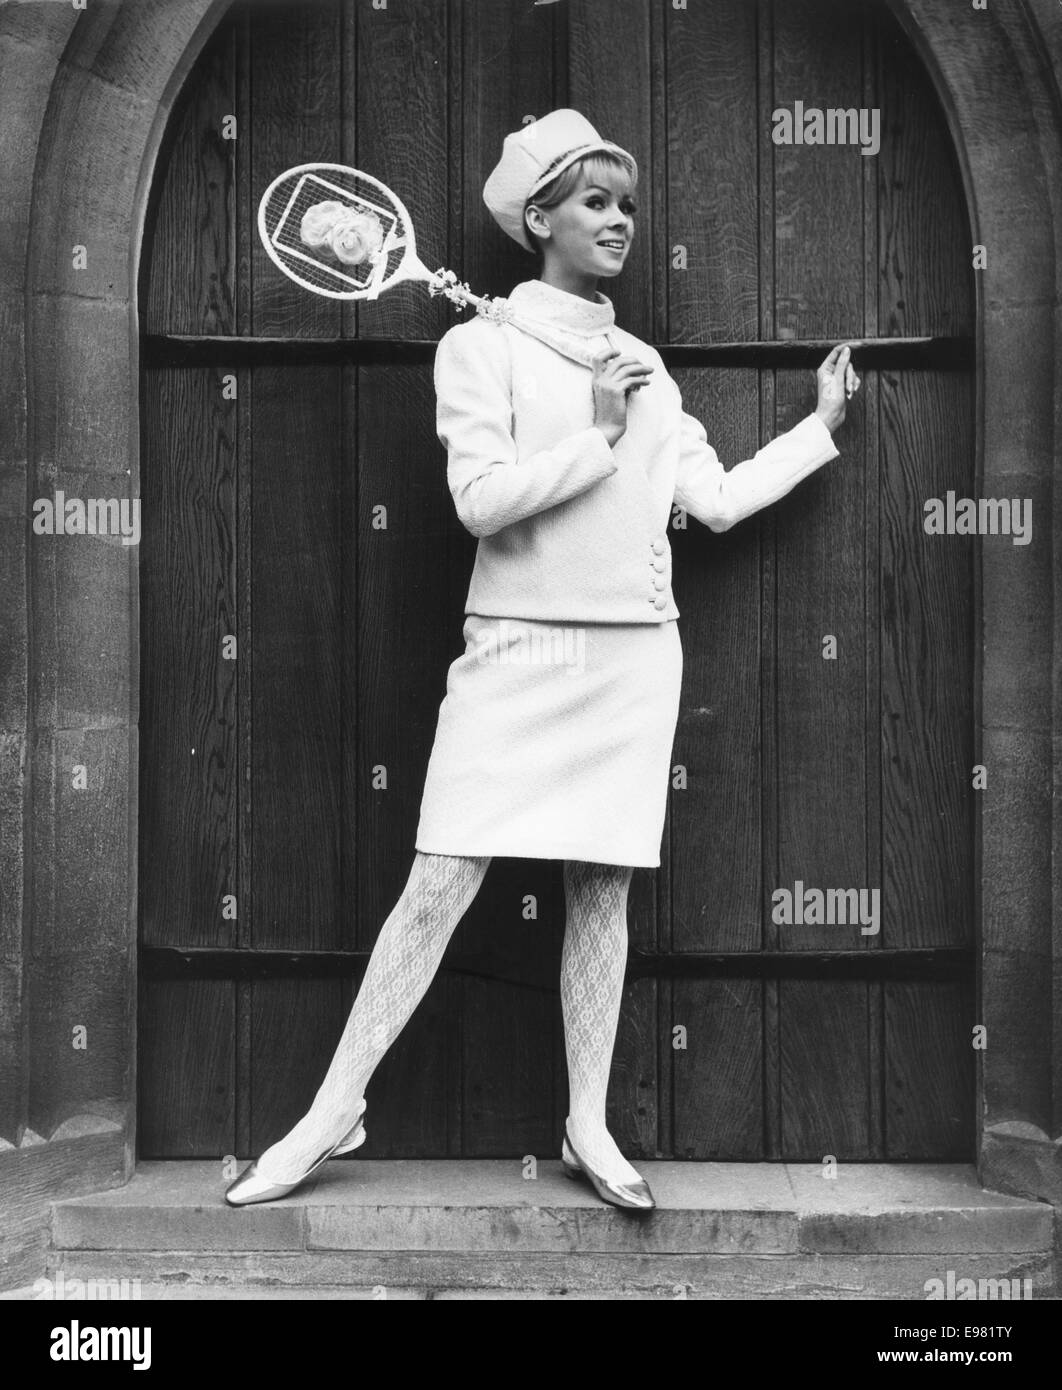 Jan 4, 1966 - London, England, United Kingdom - Model TERESA FRAEY wears 'Daredevil' a Registry office three opiece bridal suit in white Crimplene. Whit lace stockings teamed with a polo neck blouse also in white lace and matching cap headdress with a peak veil completes her outfit. The bridal range is inspired by 1966's taste for gadget-packed living and was created by designer Louis Young for the bride of 1966. The collection reveals styles that are squared, tubular and triangles. The models were instructed to walk like clockwork dolls. The grooms were robots and daleks. Young said 'Life has Stock Photo